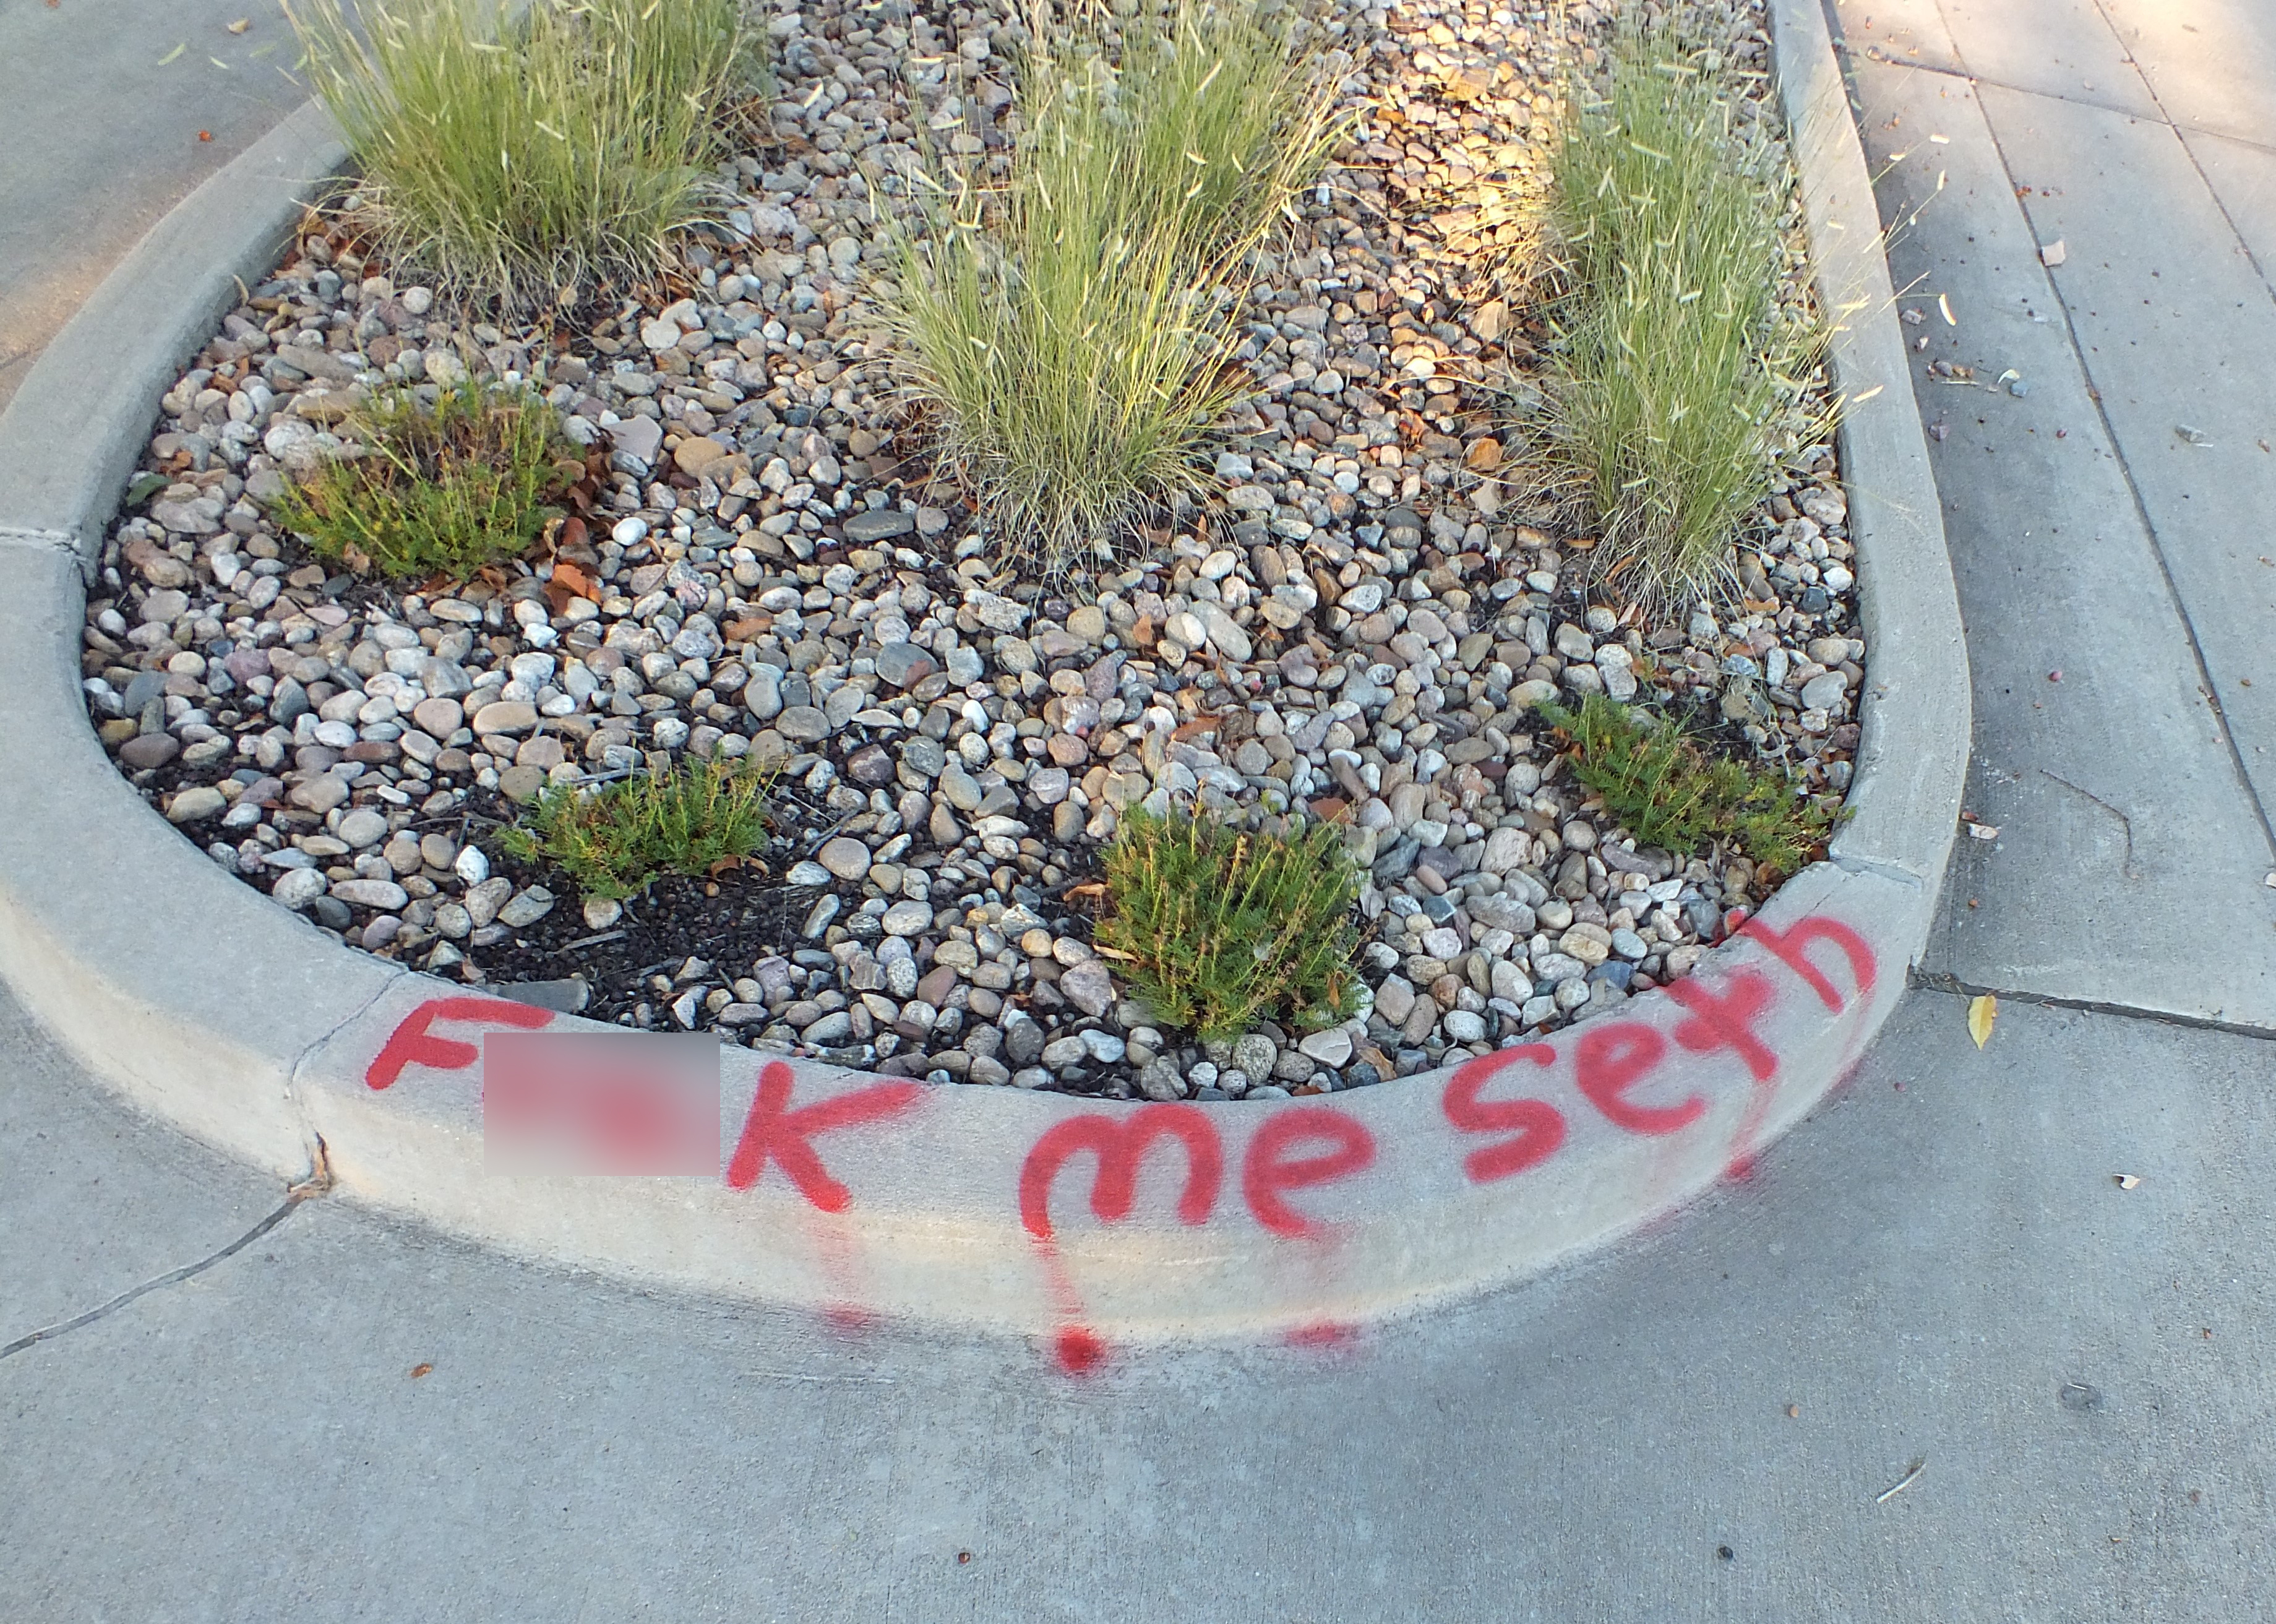 Image 4: Red graffiti on a curb that says 